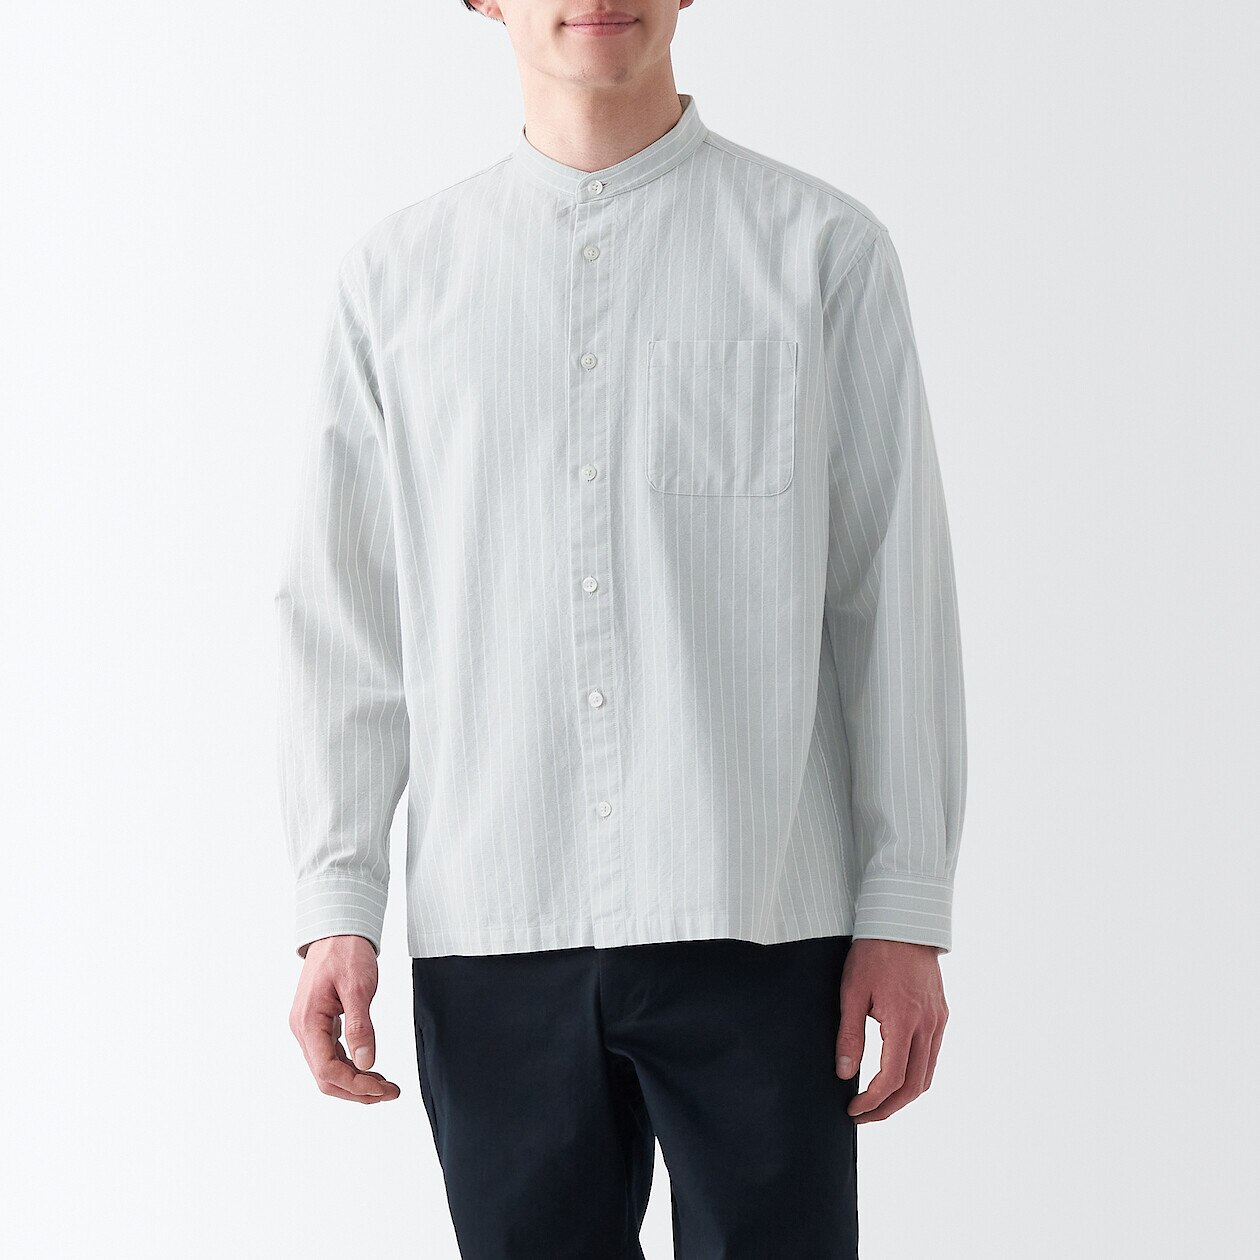 Men's Washed Oxford Stand Collar Shirt.